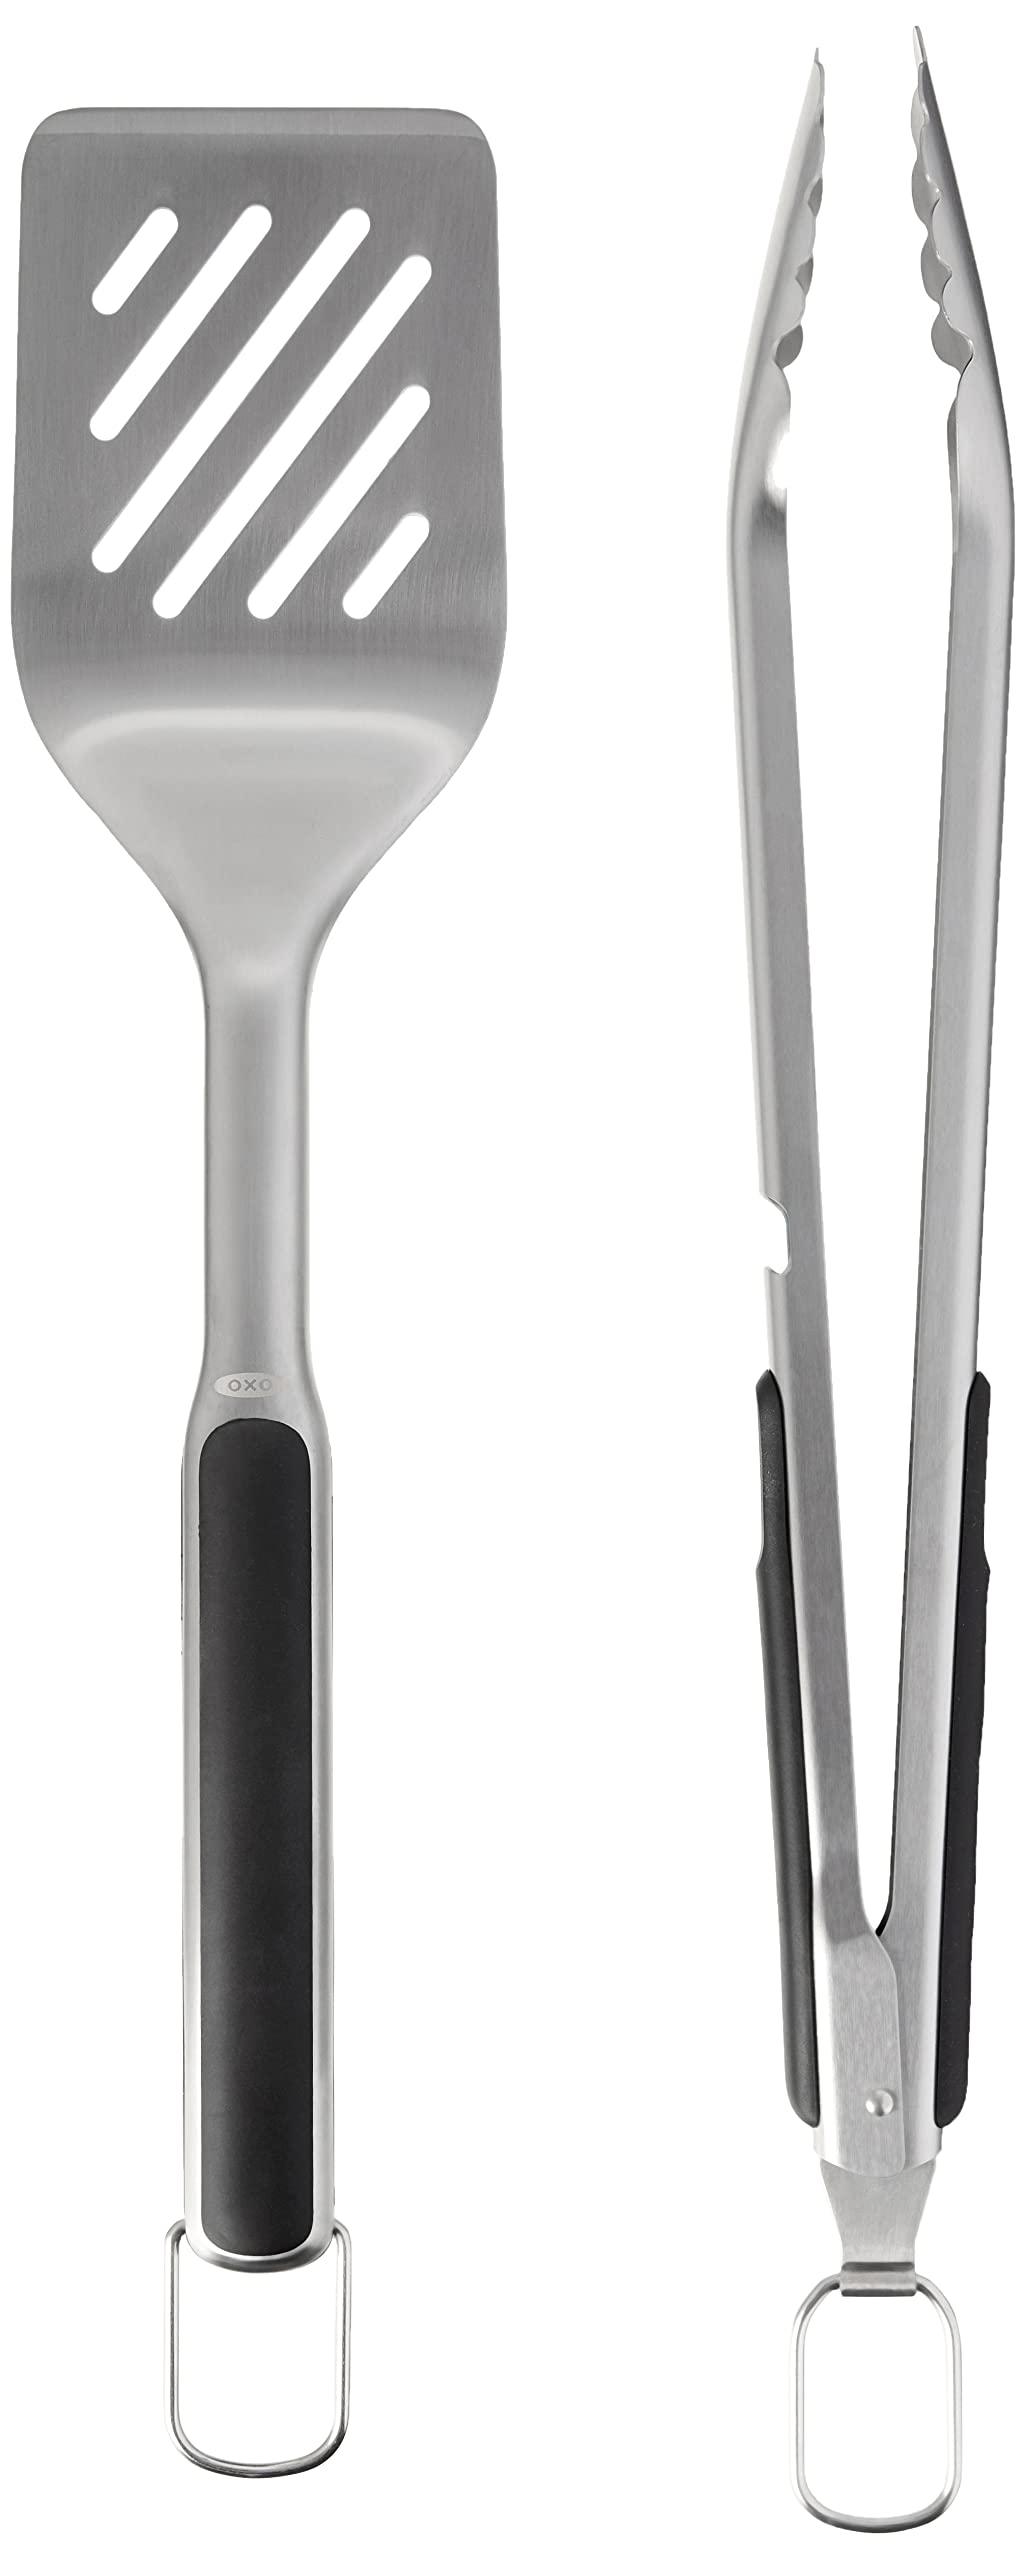 OXO Good Grips Grilling, 3pc Set - Tongs, Turner and Tool Rest, Black - CookCave